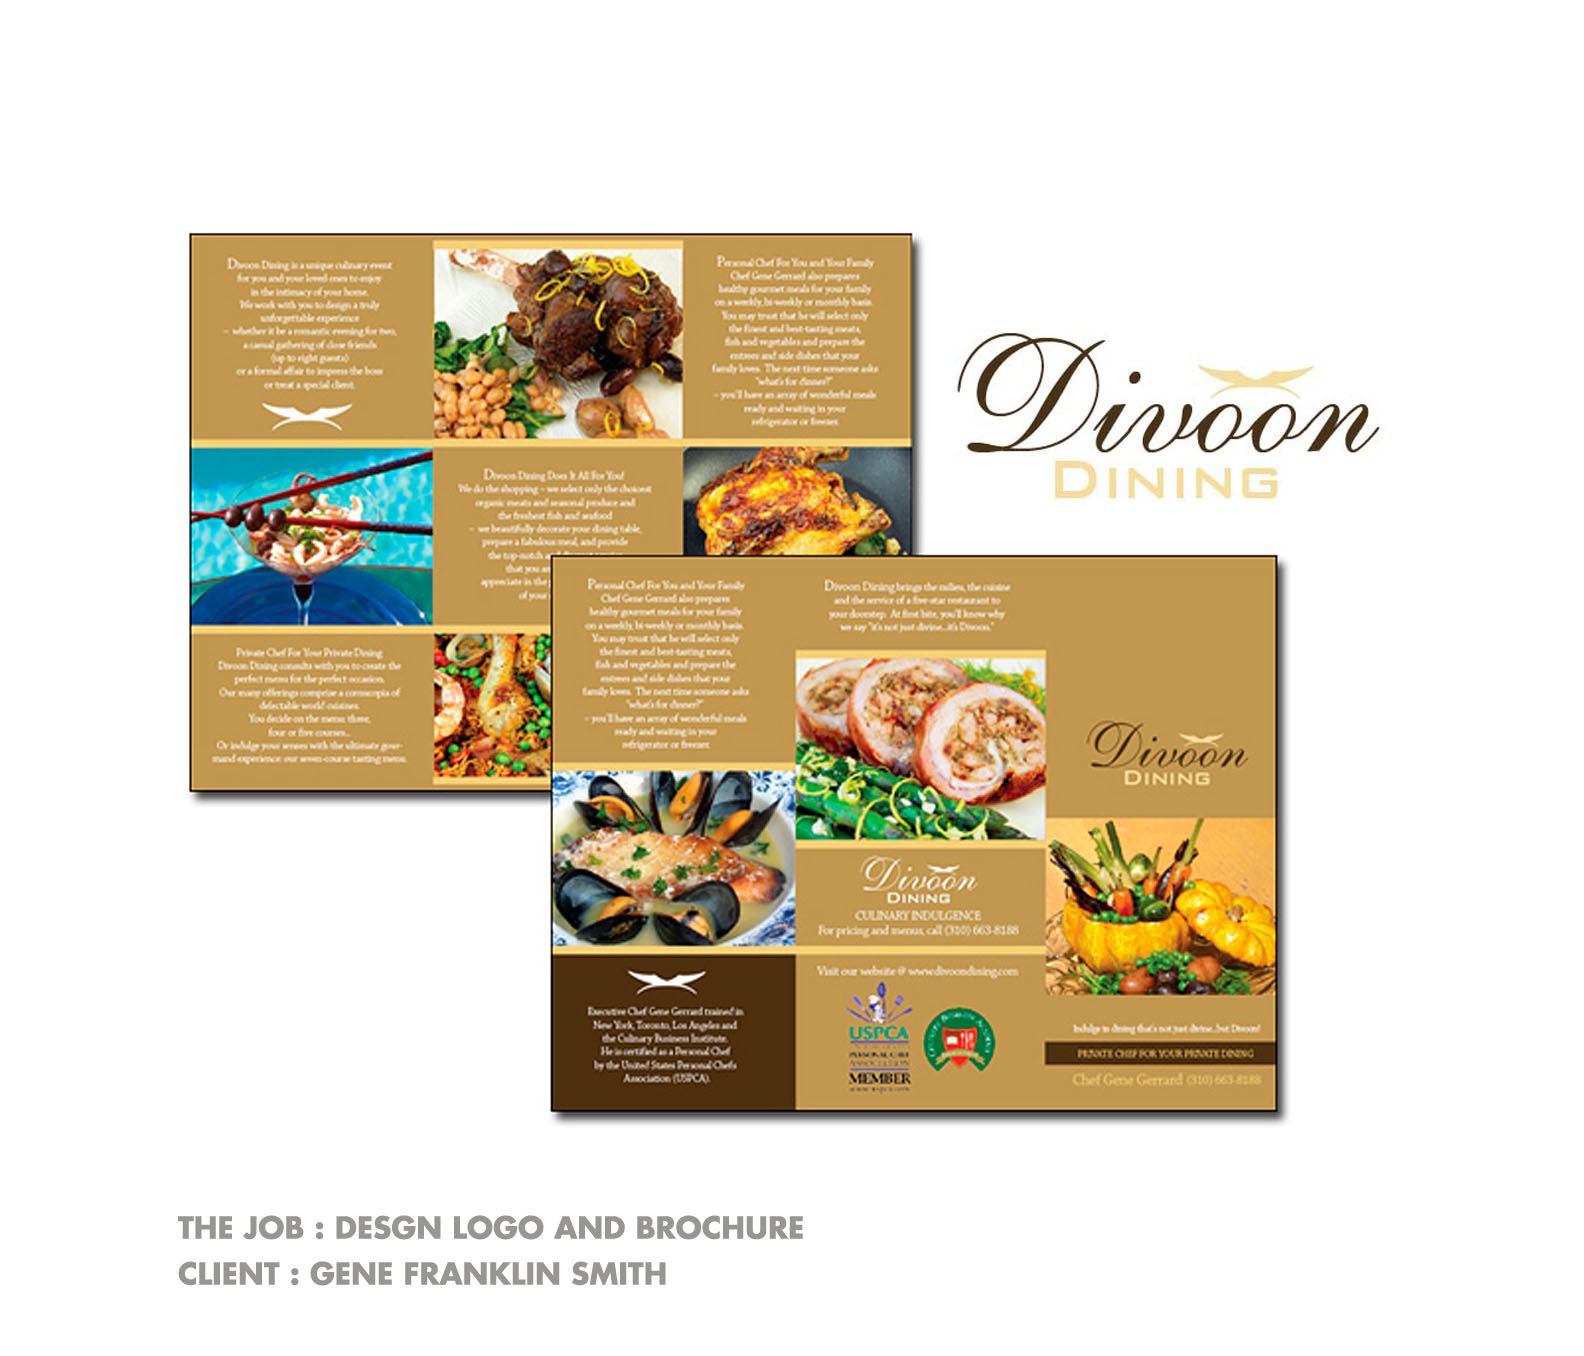 DIVOON DINING A Personal Chef Service In Los Angeles